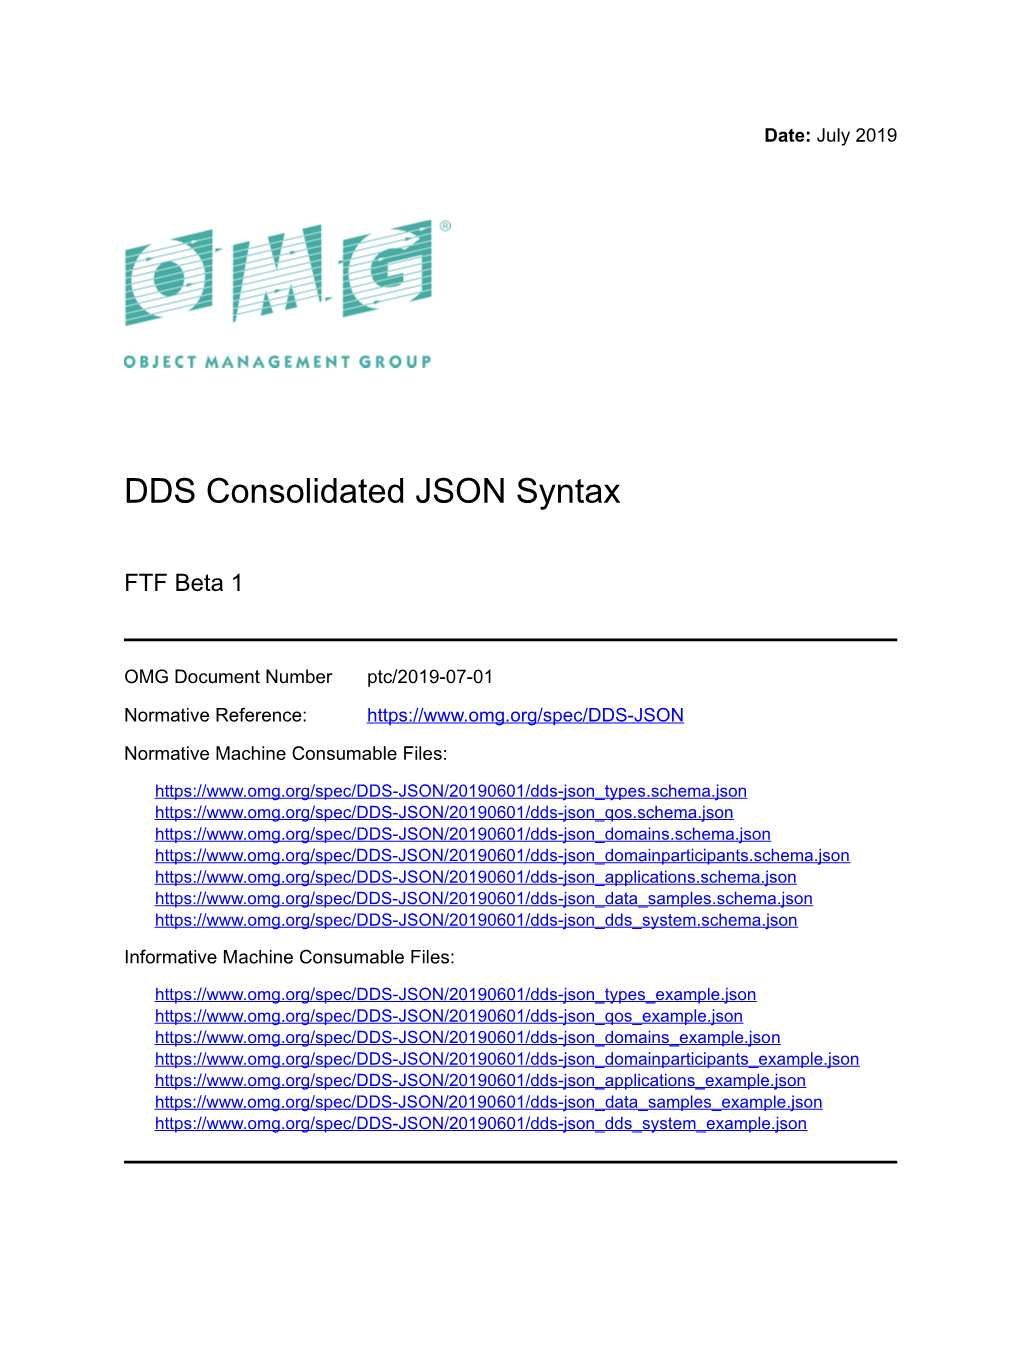 DDS Consolidated JSON Syntax